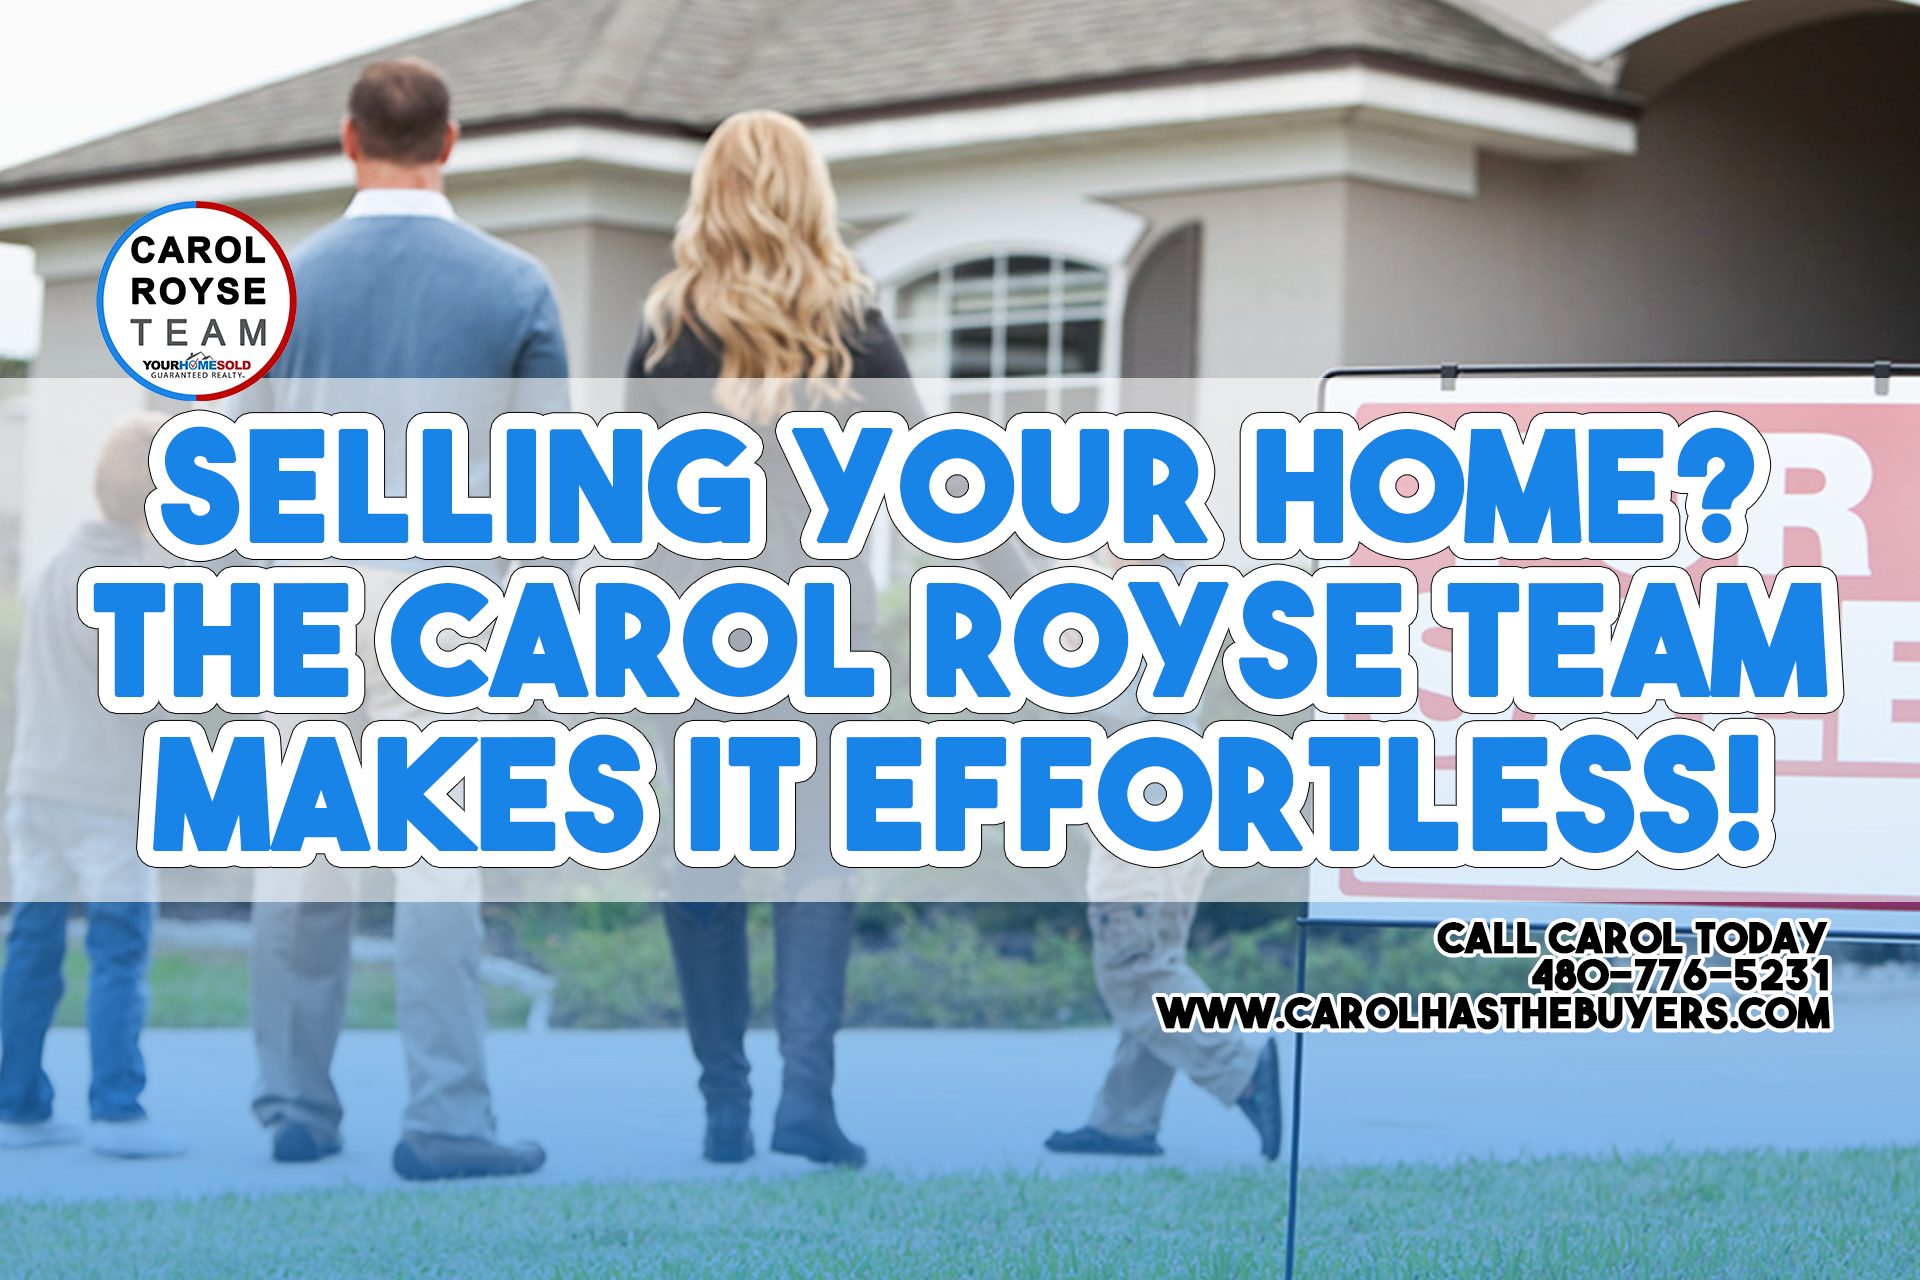 Selling Your Home? The Carol Royse Team Makes It Effortless!